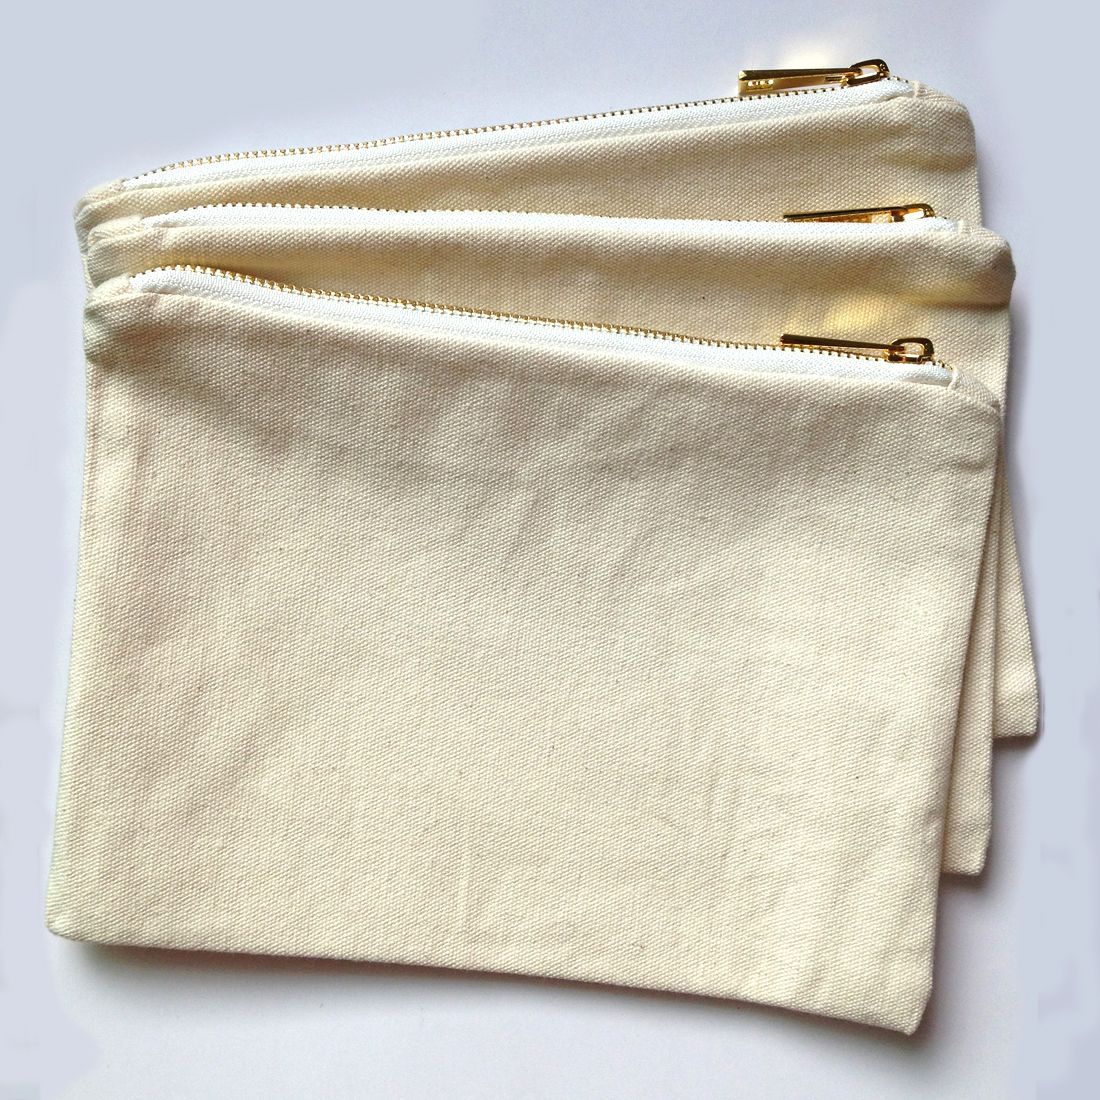 12oz Natural Cotton Cream Color Canvas Makeup Bag with Matching Color Lining Blank 7x10in ...